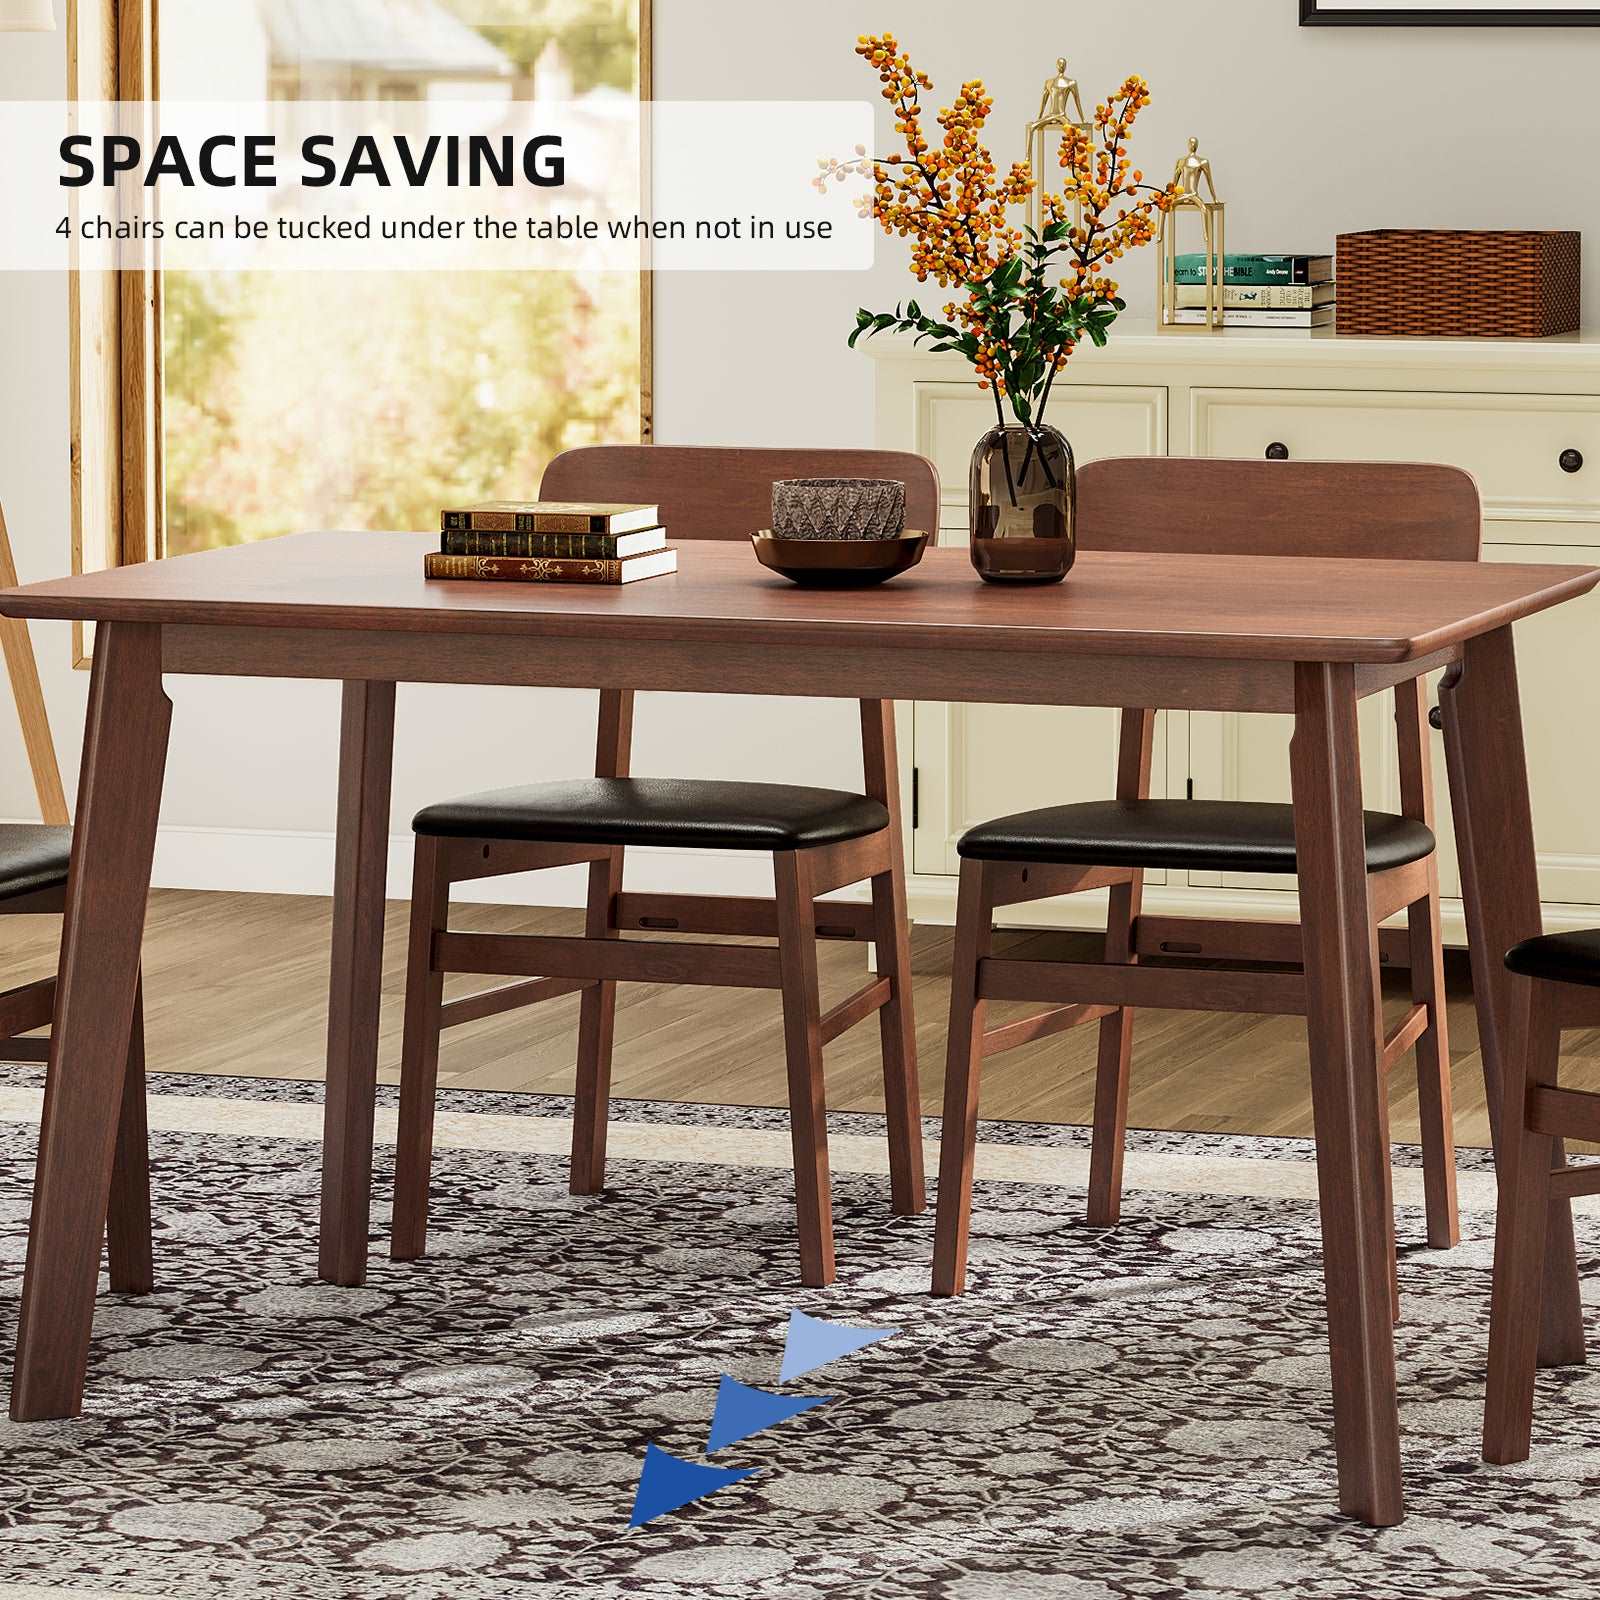 Bellemave® 5-Pieces Rustic Retro Solid RubberWood Dining Table Set,1 Dining Table and 4 Chairs